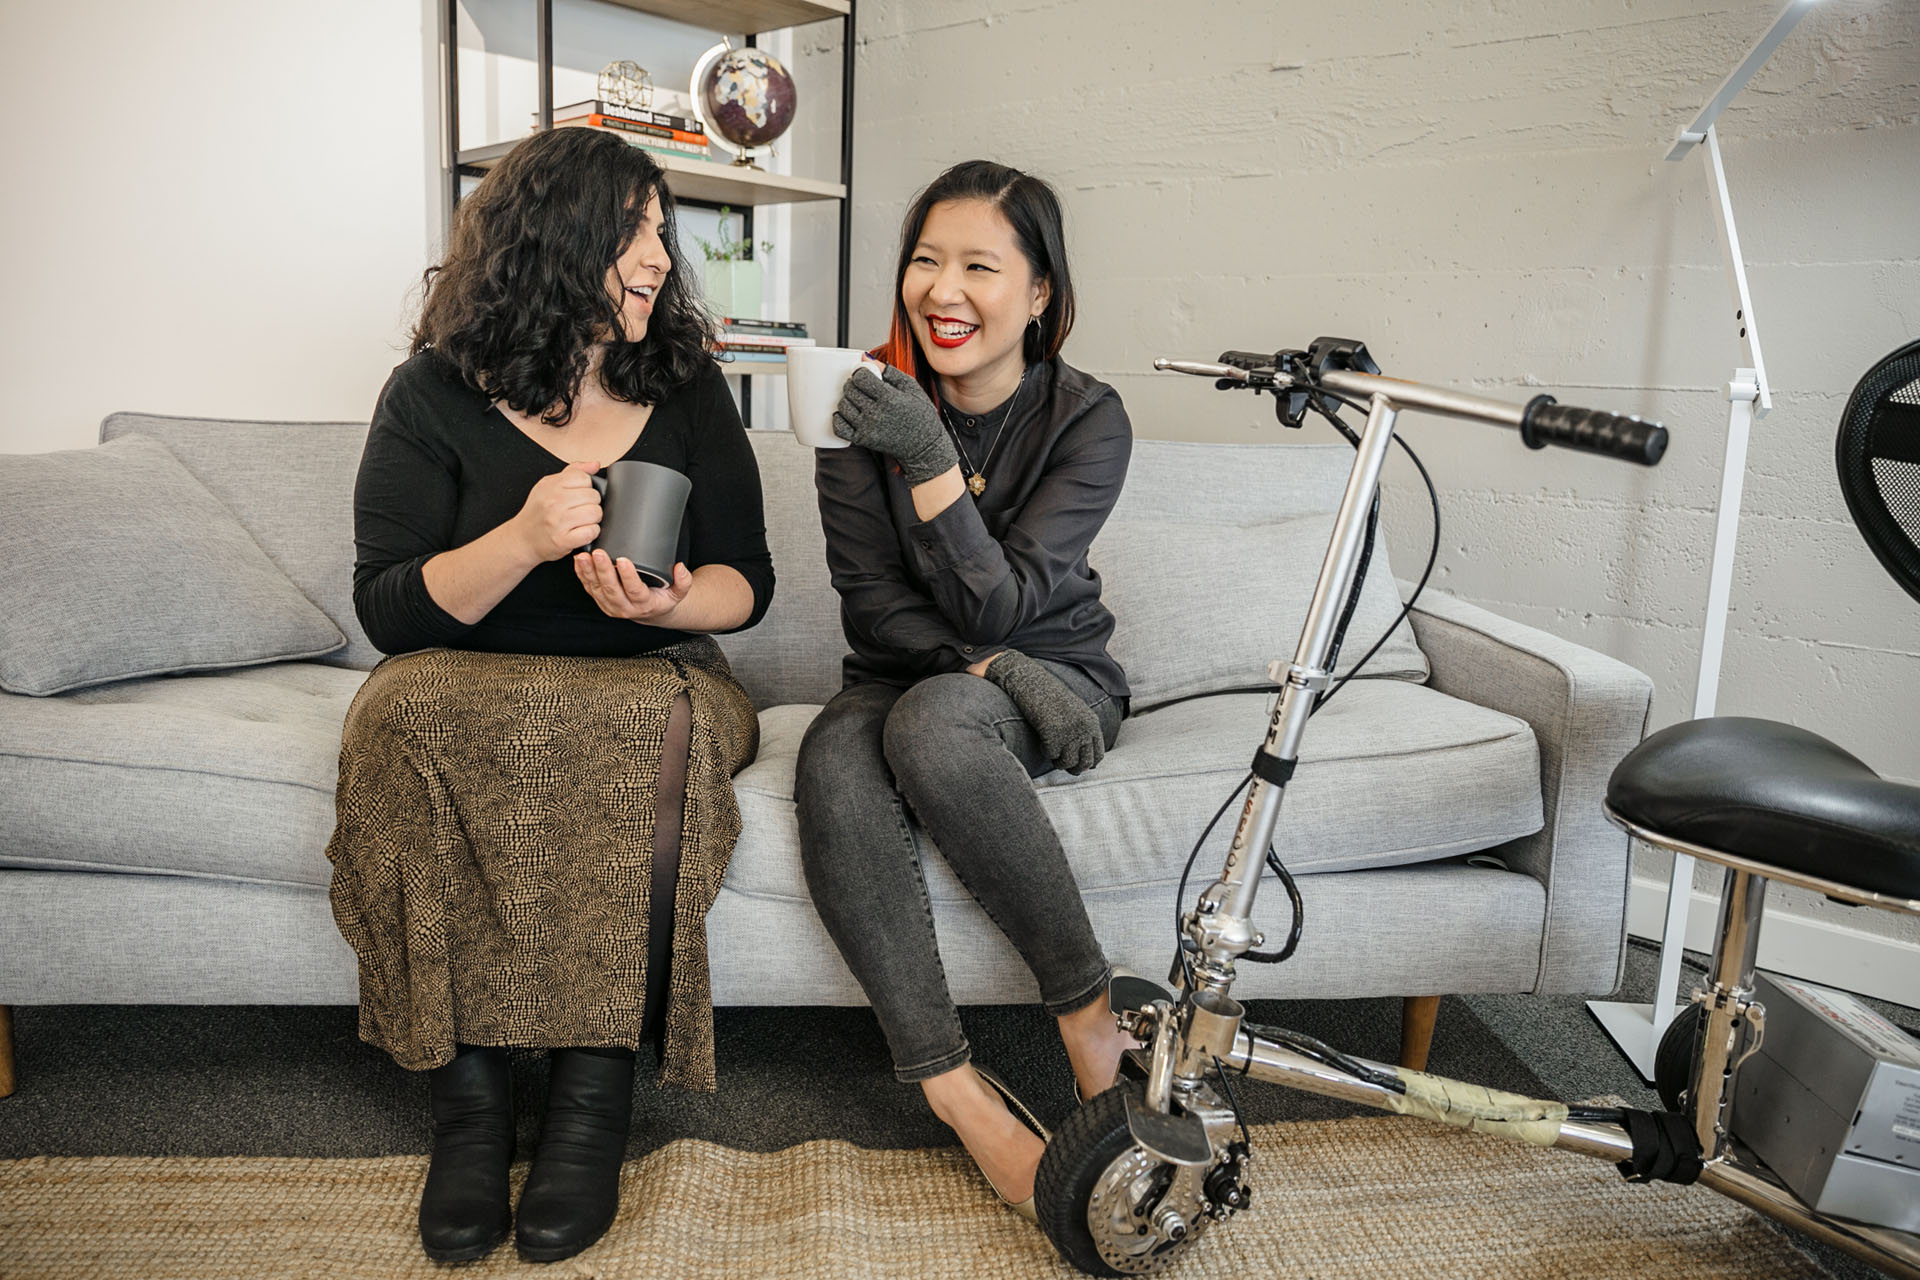 Two people sitting on a couch holding coffee cups and smiling. A lightweight electric mobility scooter is parked off to the side. Image courtesy of Disabled and Here.